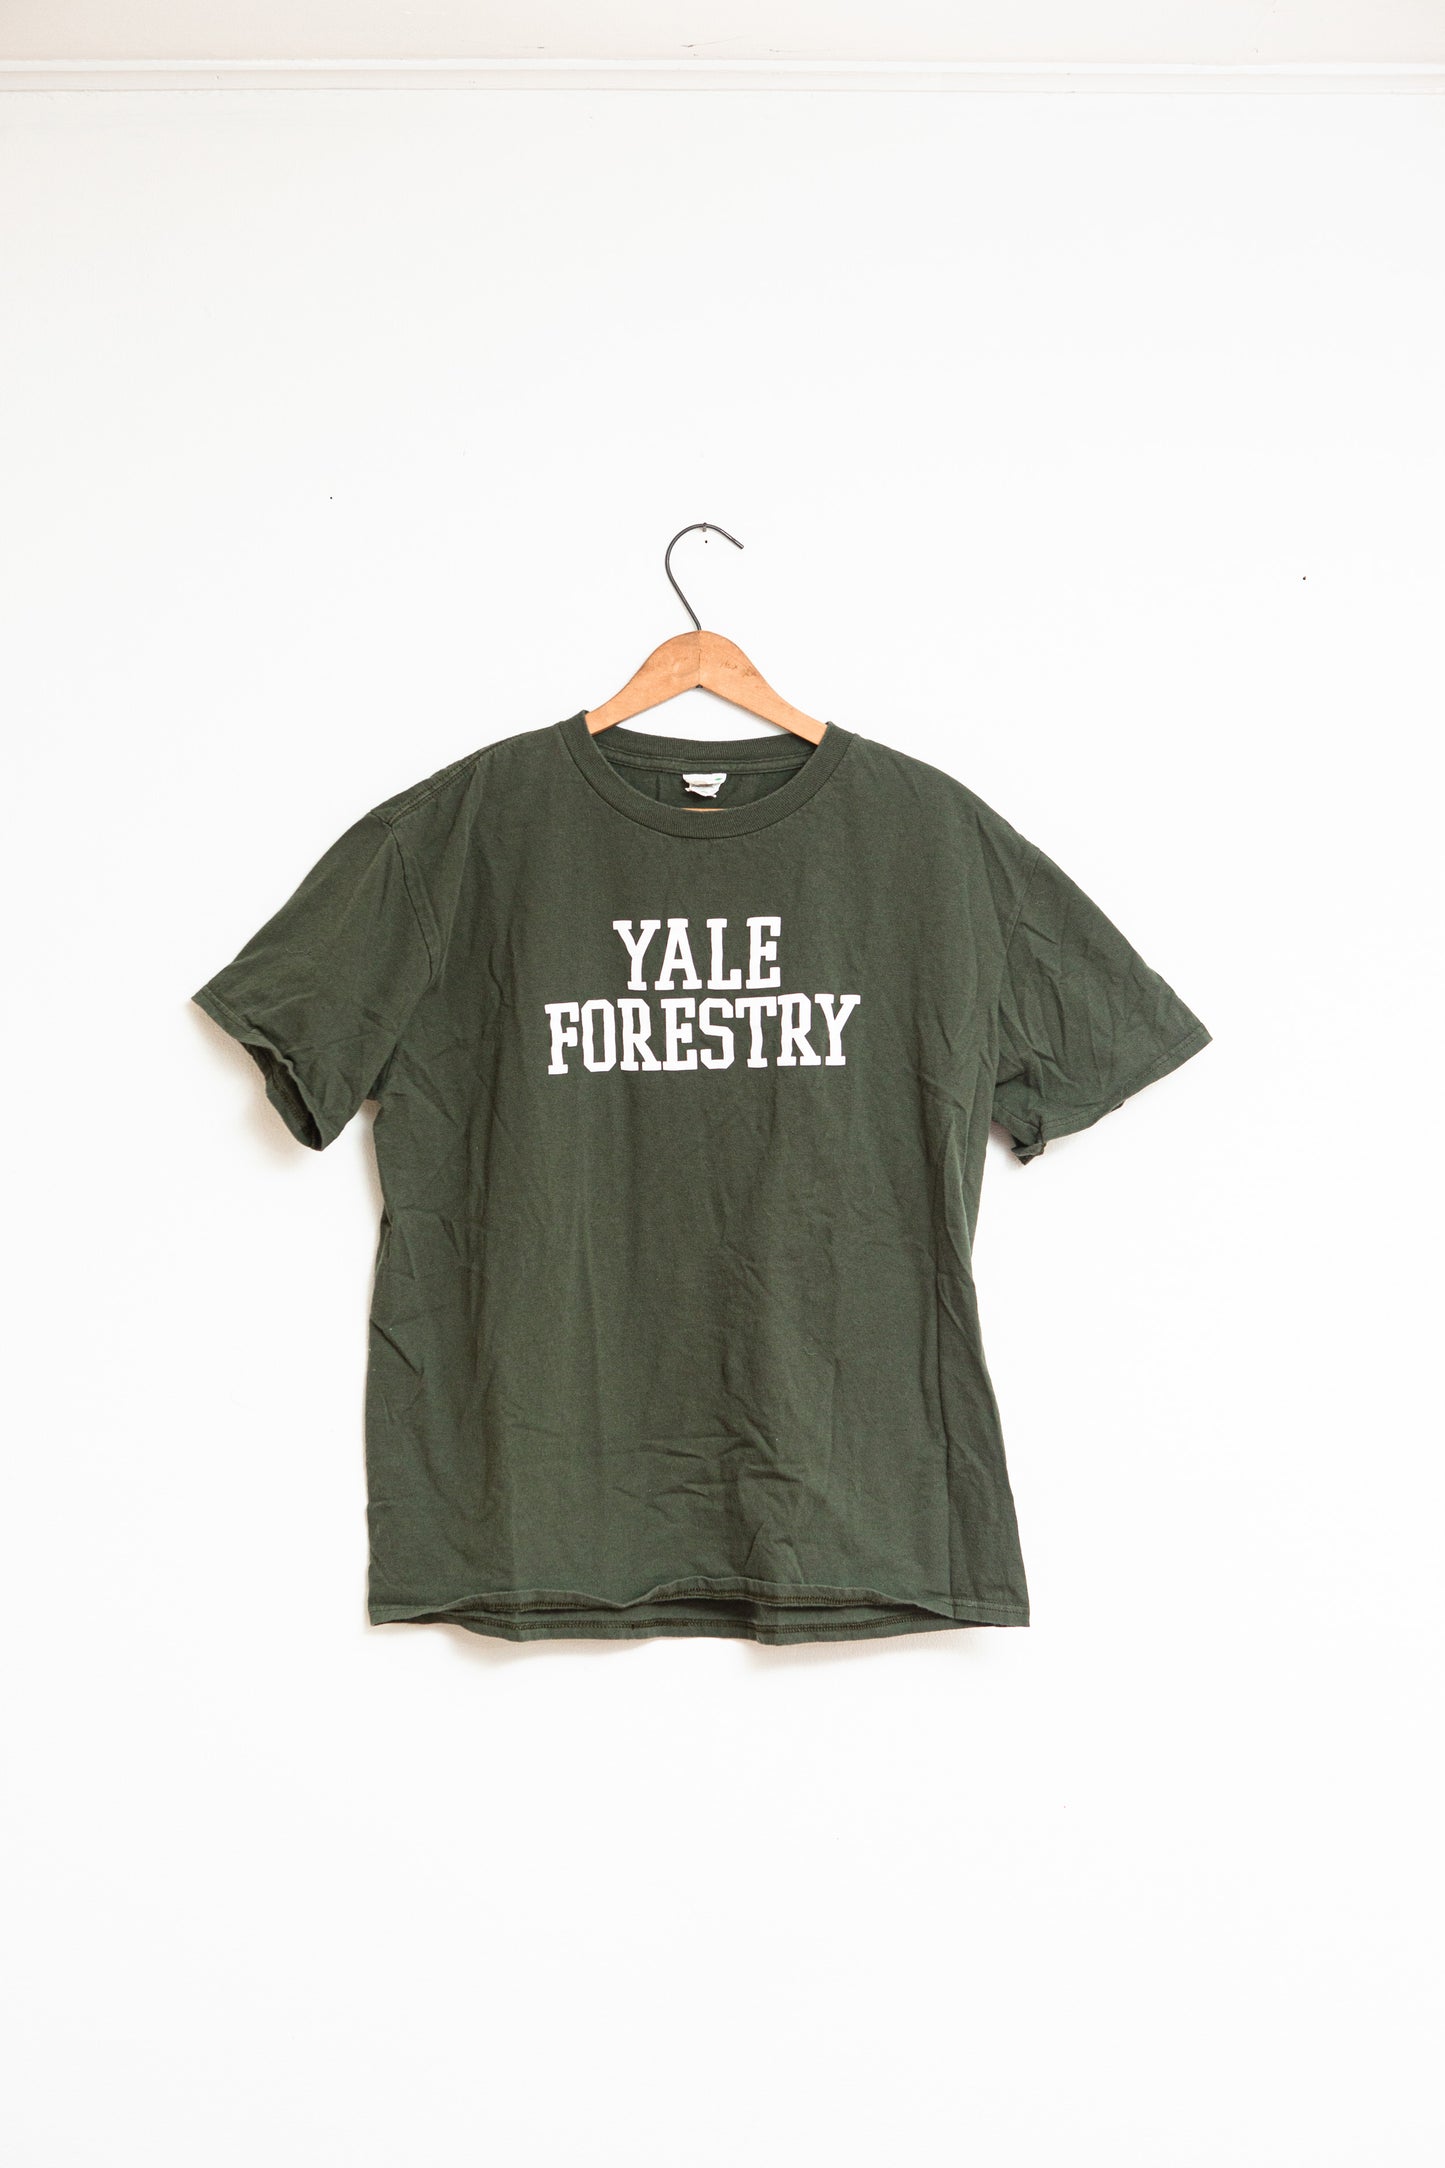 Vintage Yale Forestry Green T-shirt Size L